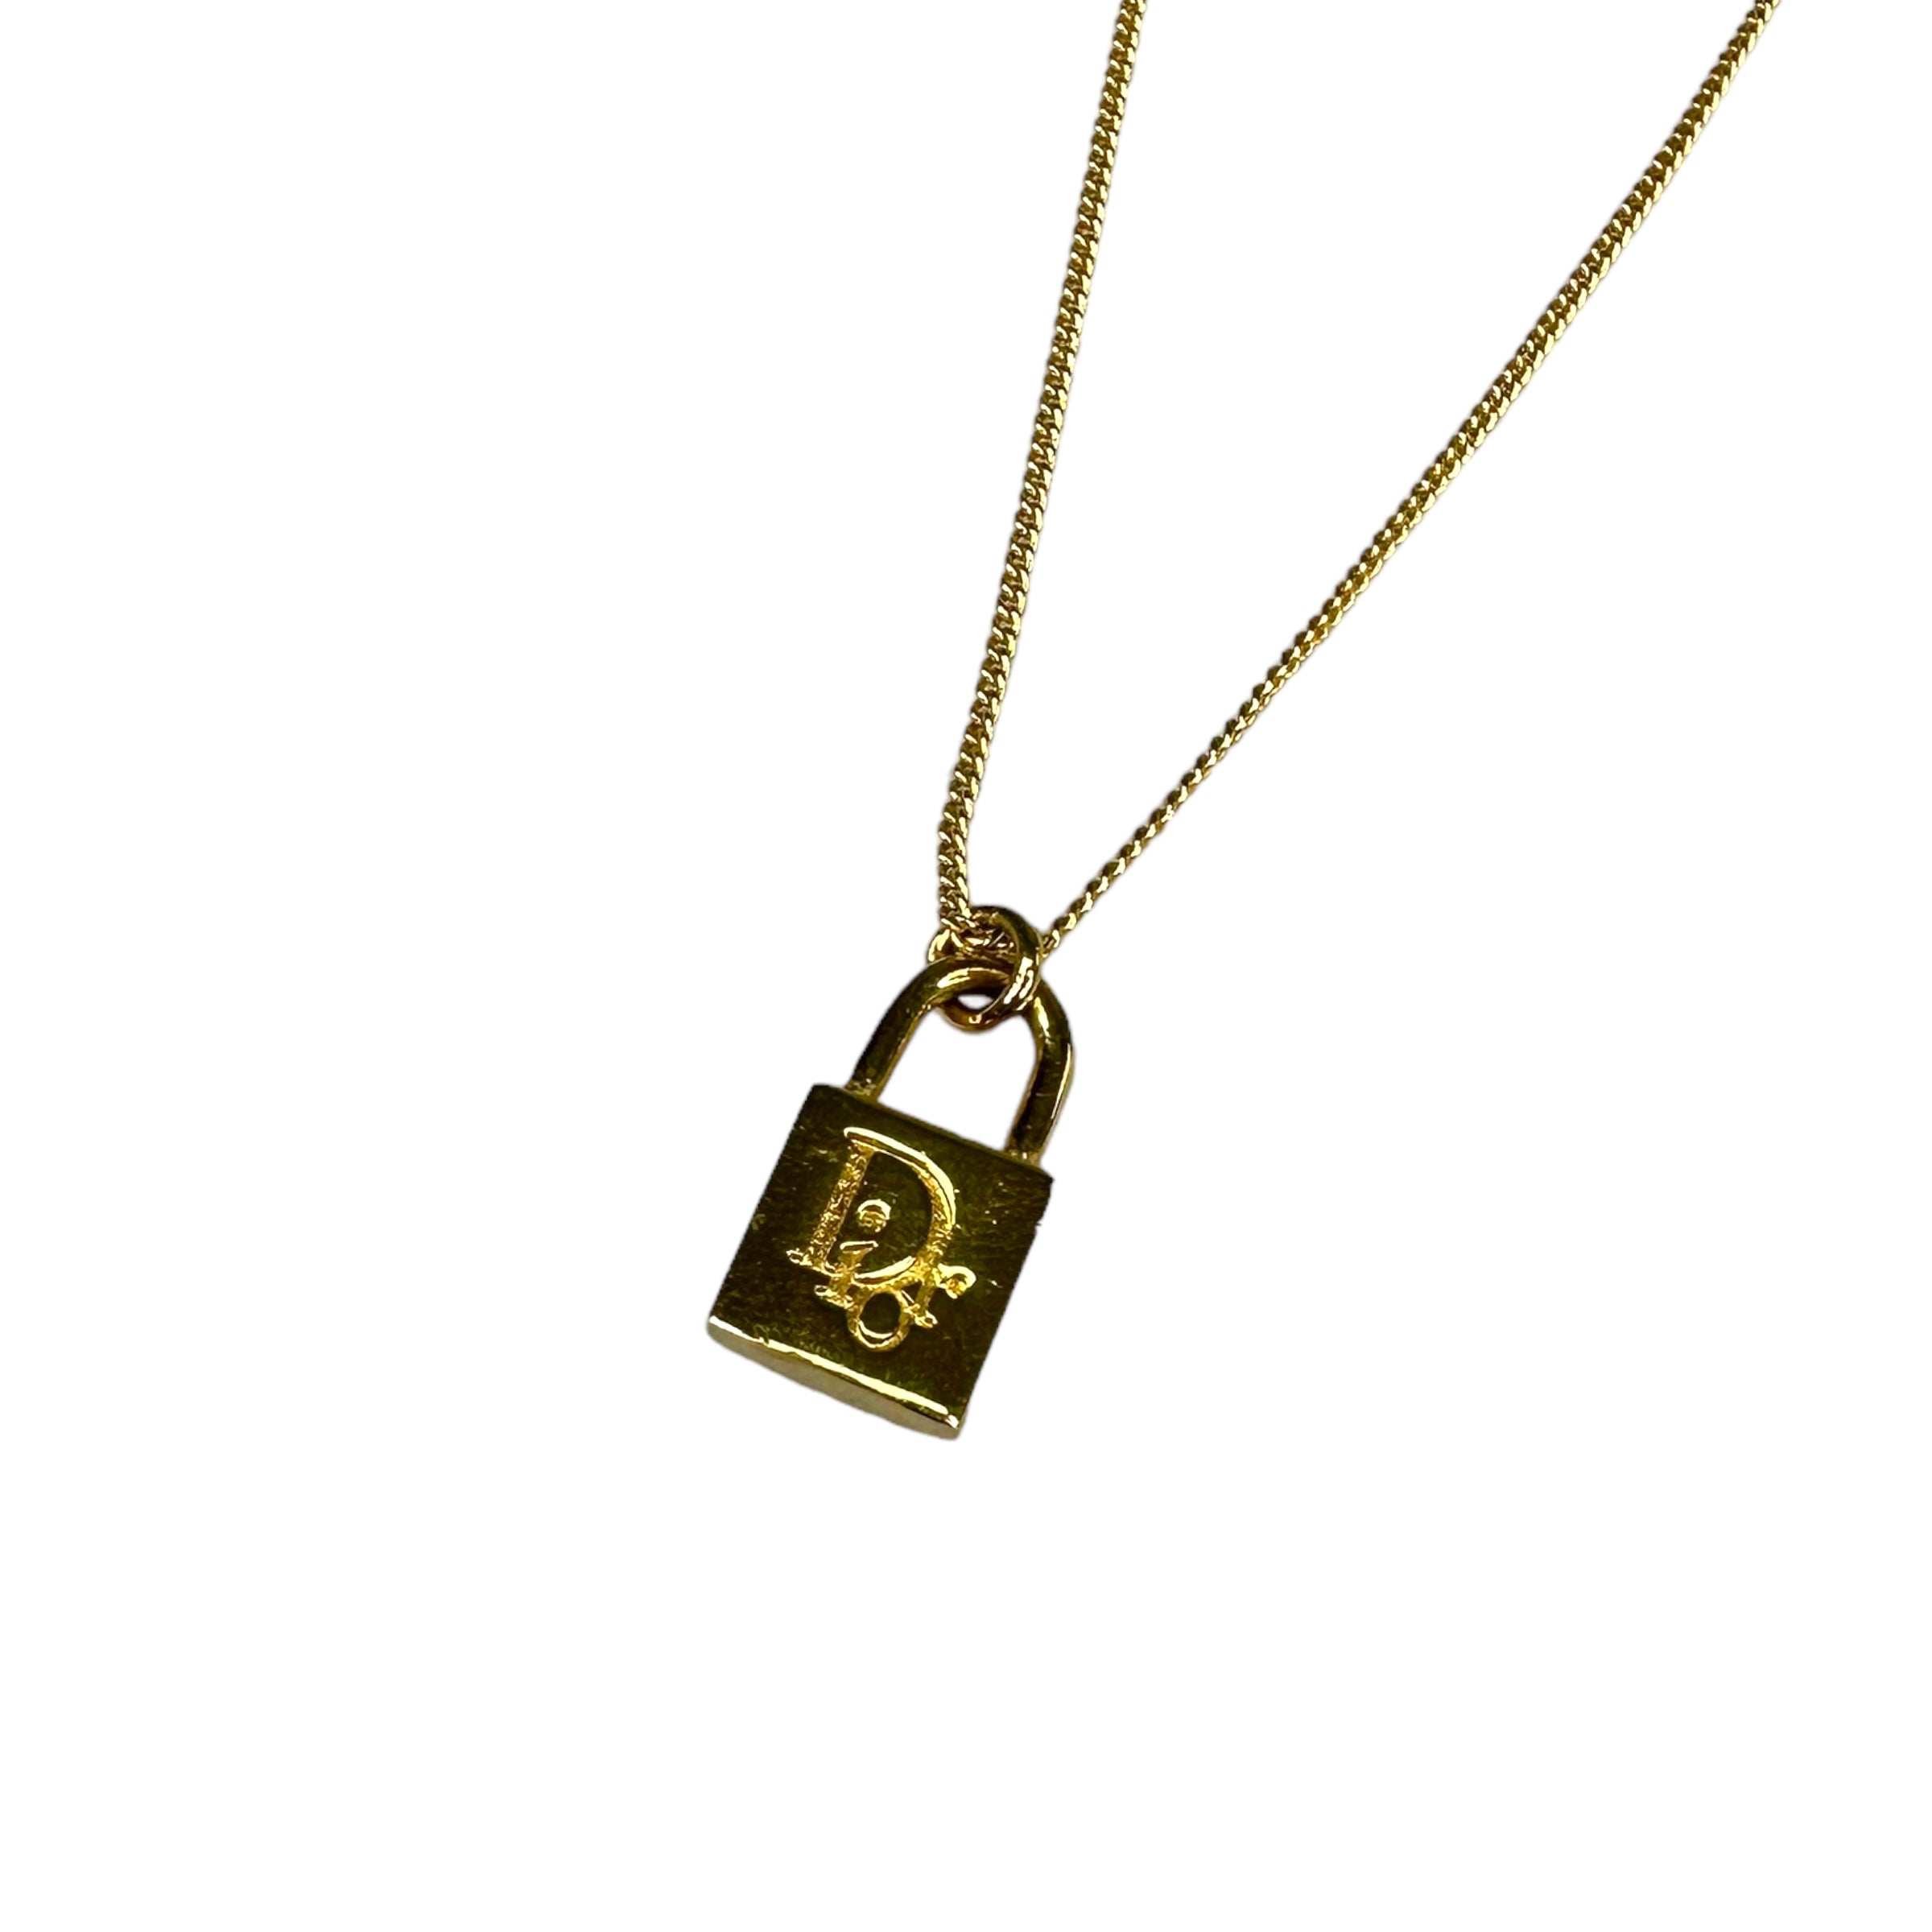 DIOR GOLD PLATED PADLOCK PENDANT NECKLACE